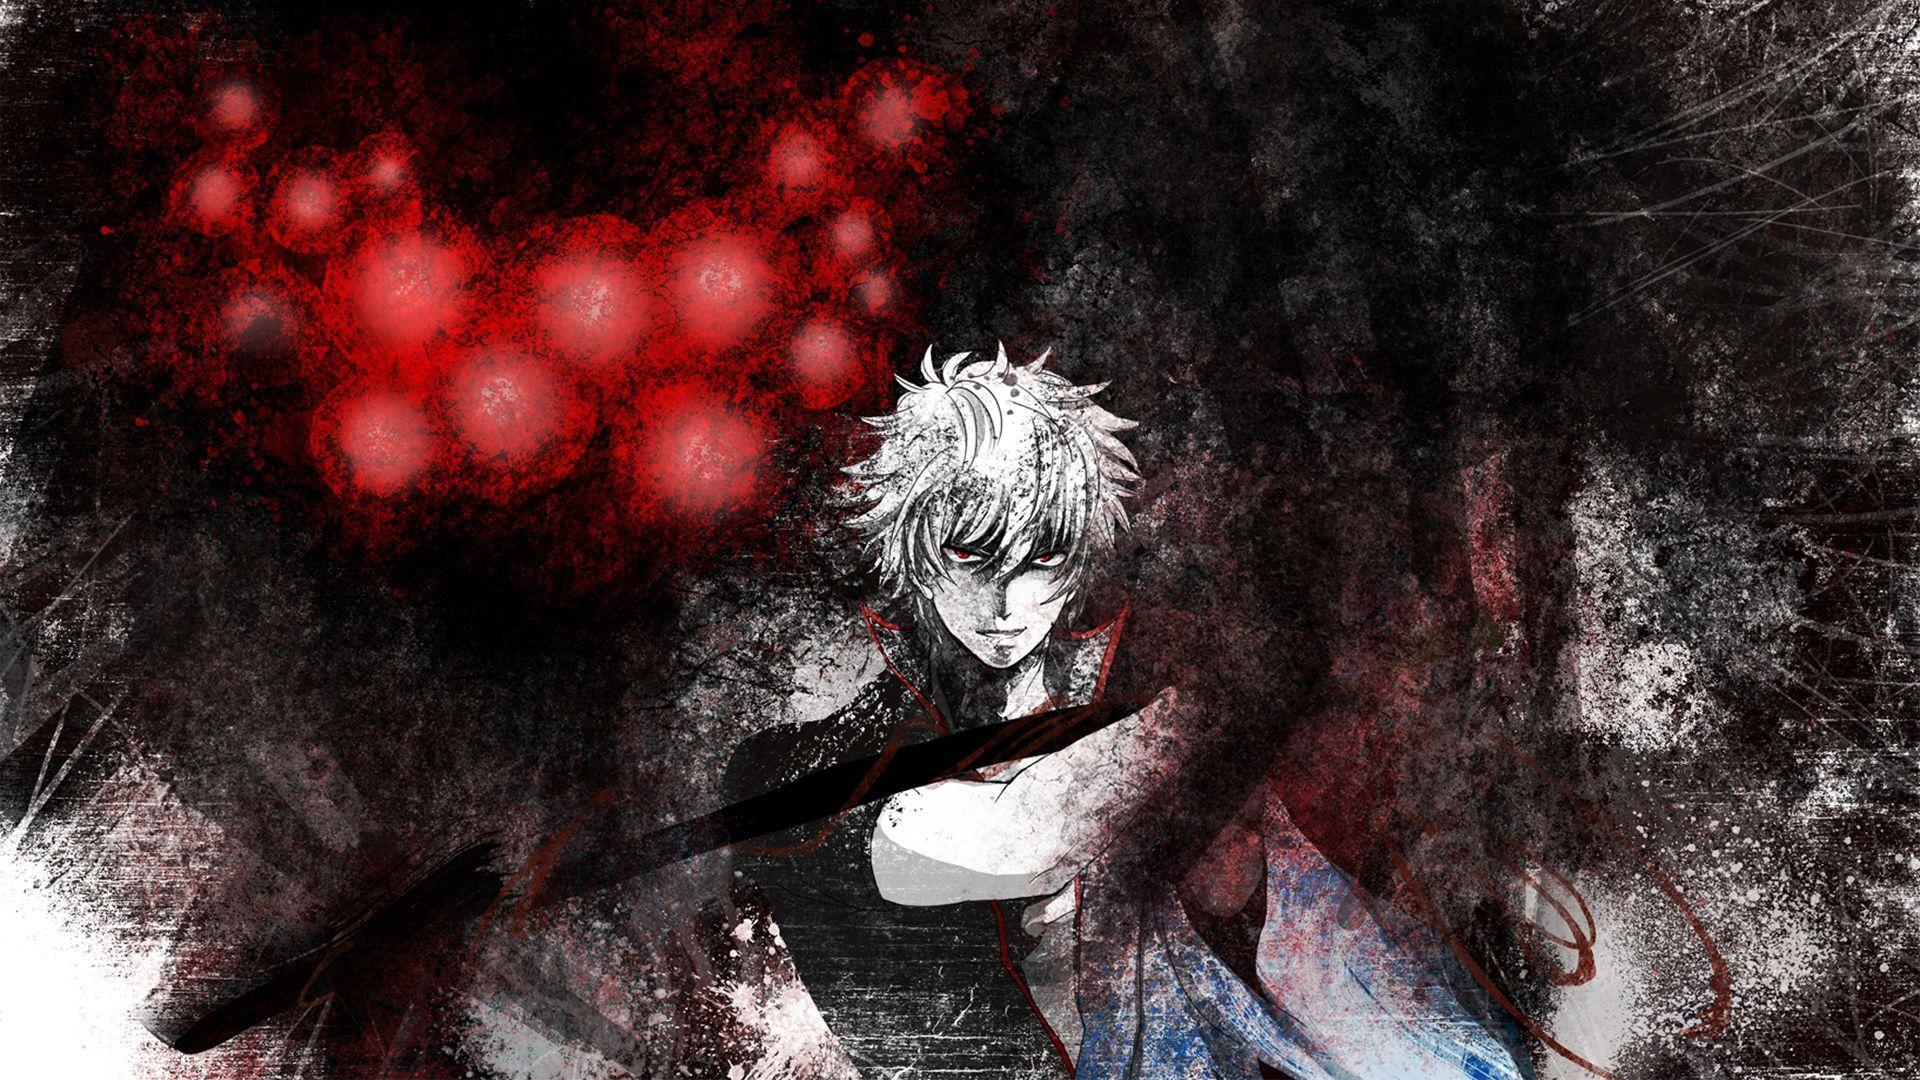 Gintama 2K Wallpapers and Backgrounds